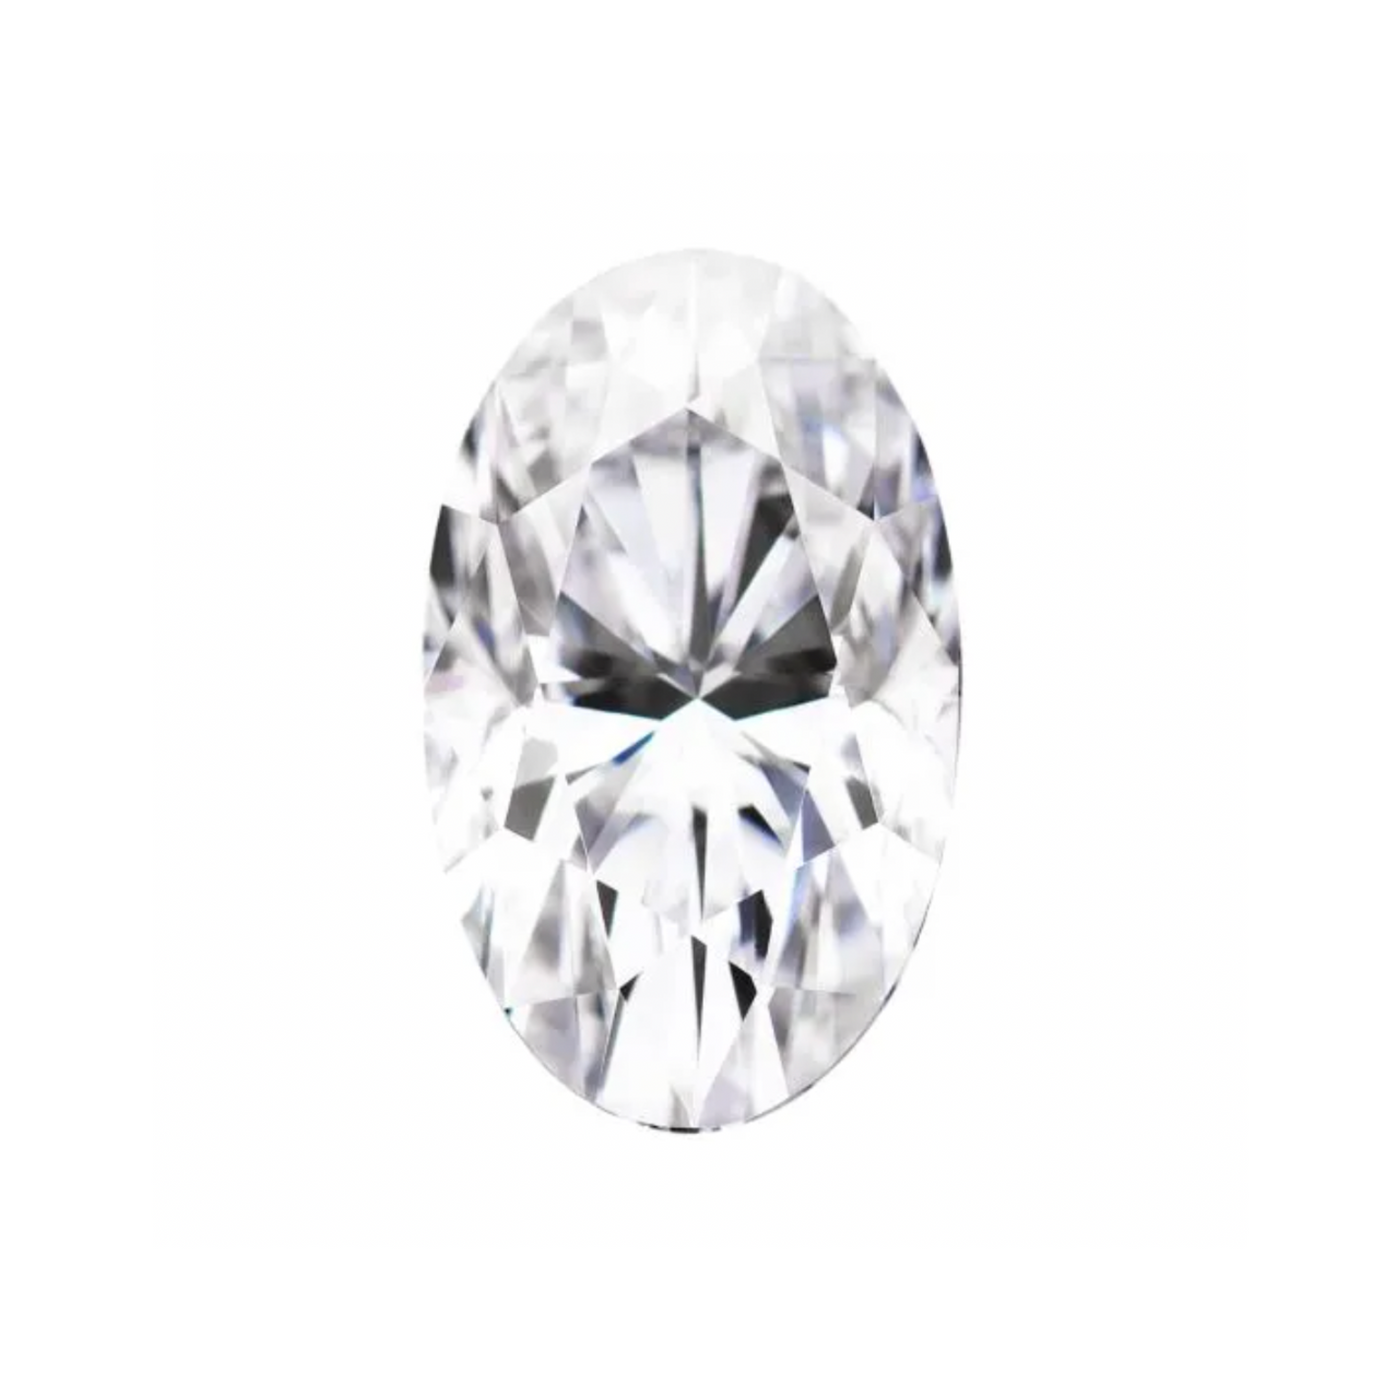 Colorless Moissanite ~ Elongated Oval Cut